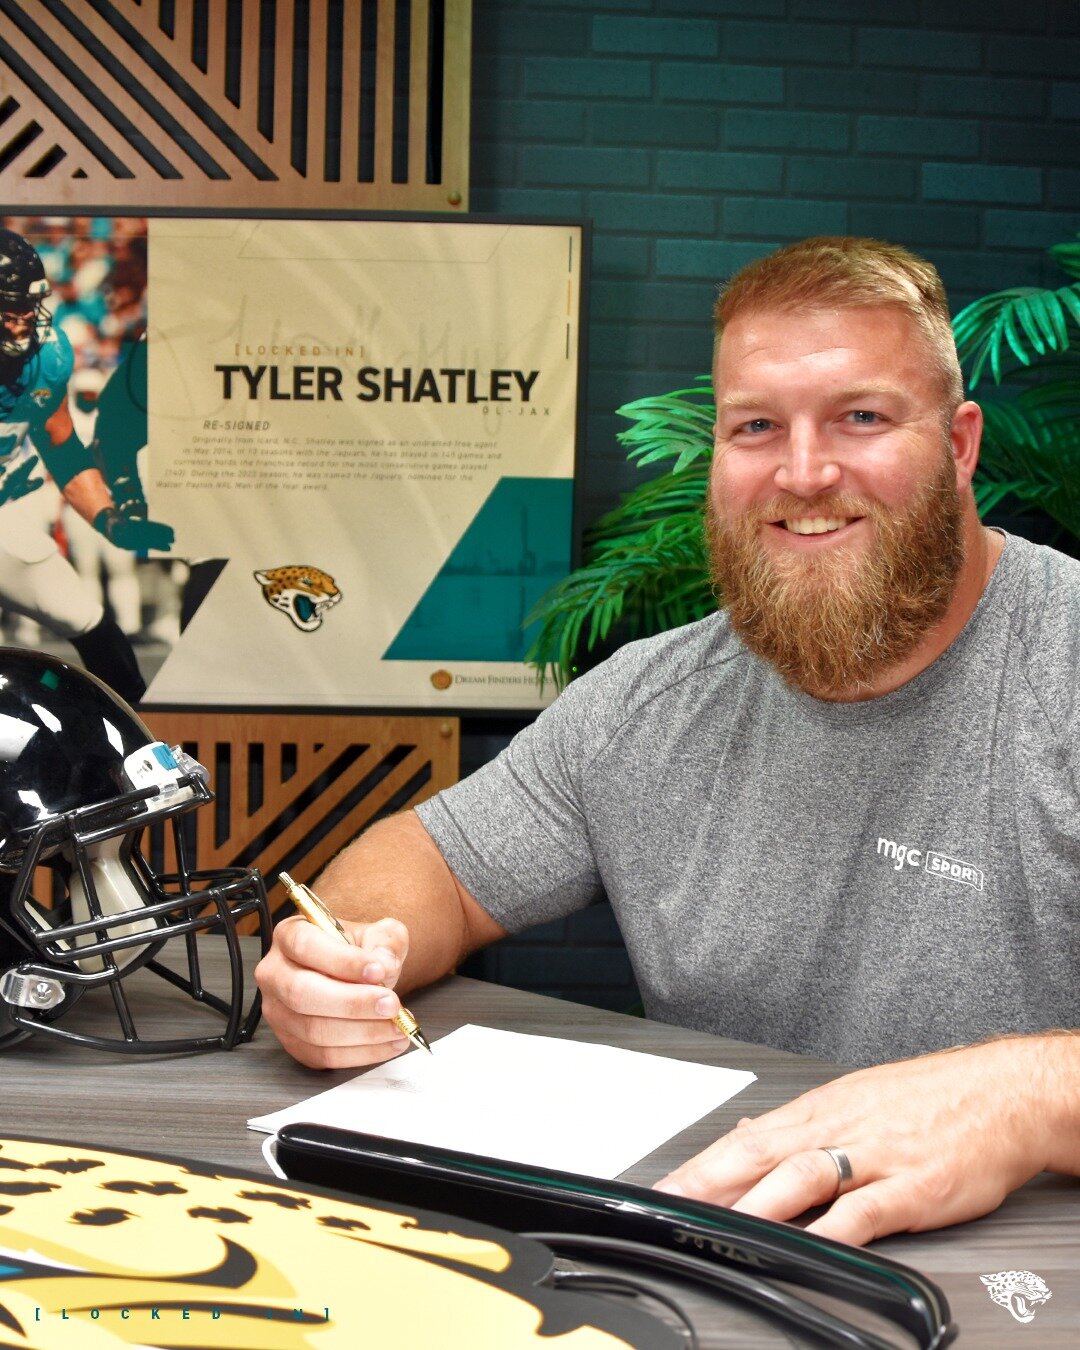 Valdese native and East Burke alum Tyler Shatley on April 19 re-signed with the Jacksonville Jaguars to start his second decade in the NFL.